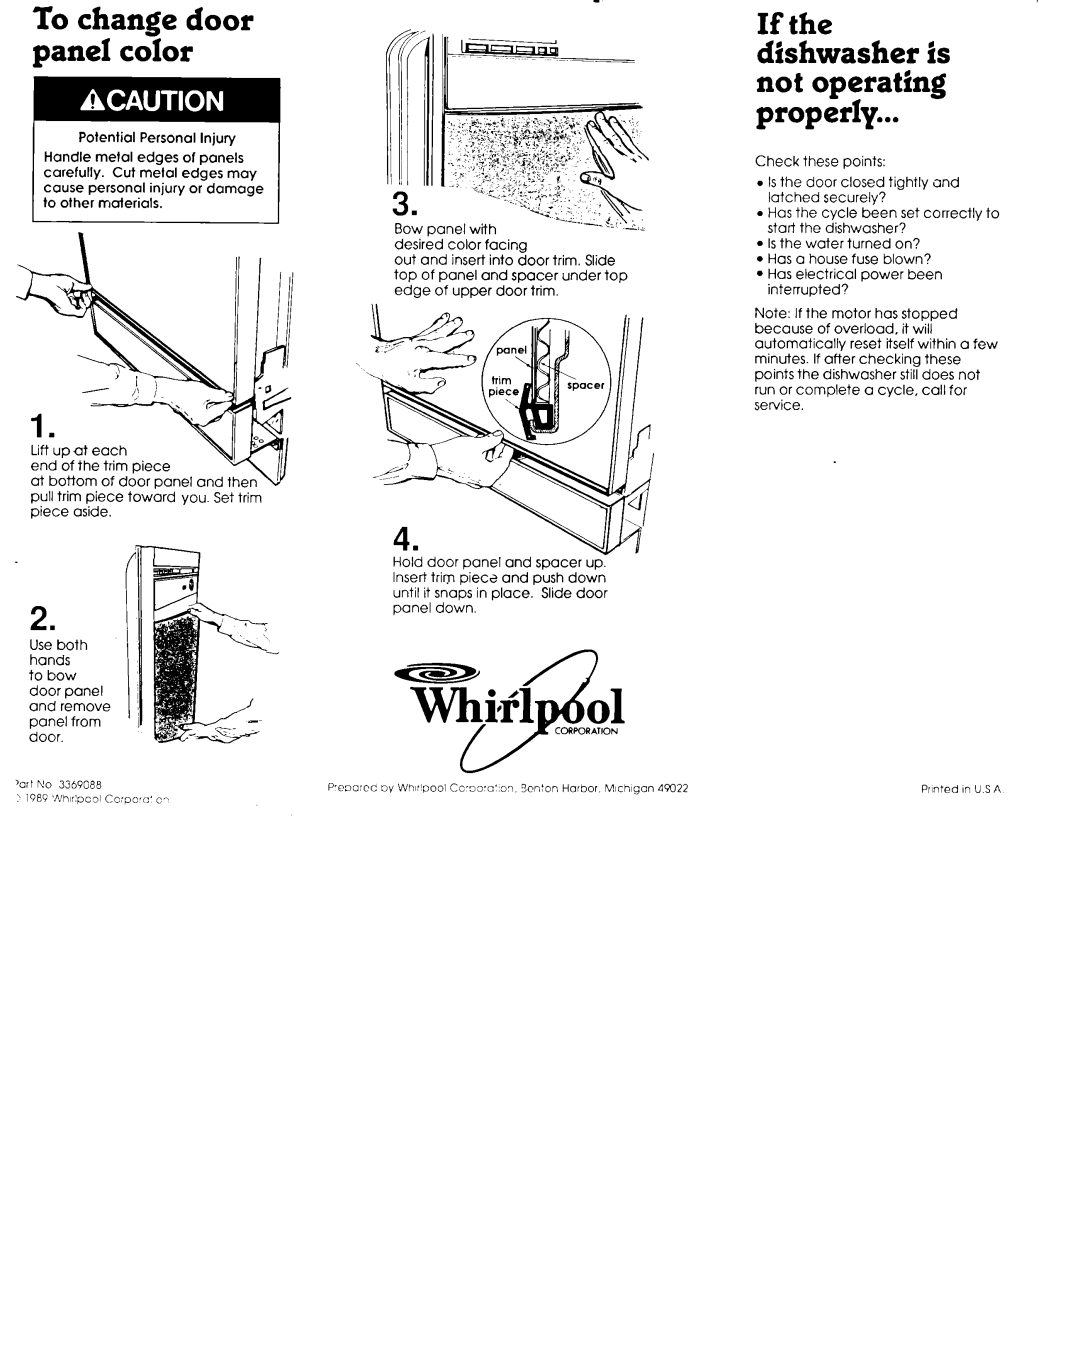 Whirlpool 3369088 installation instructions To change door panel color, dishwasher is not operating properly, If the 